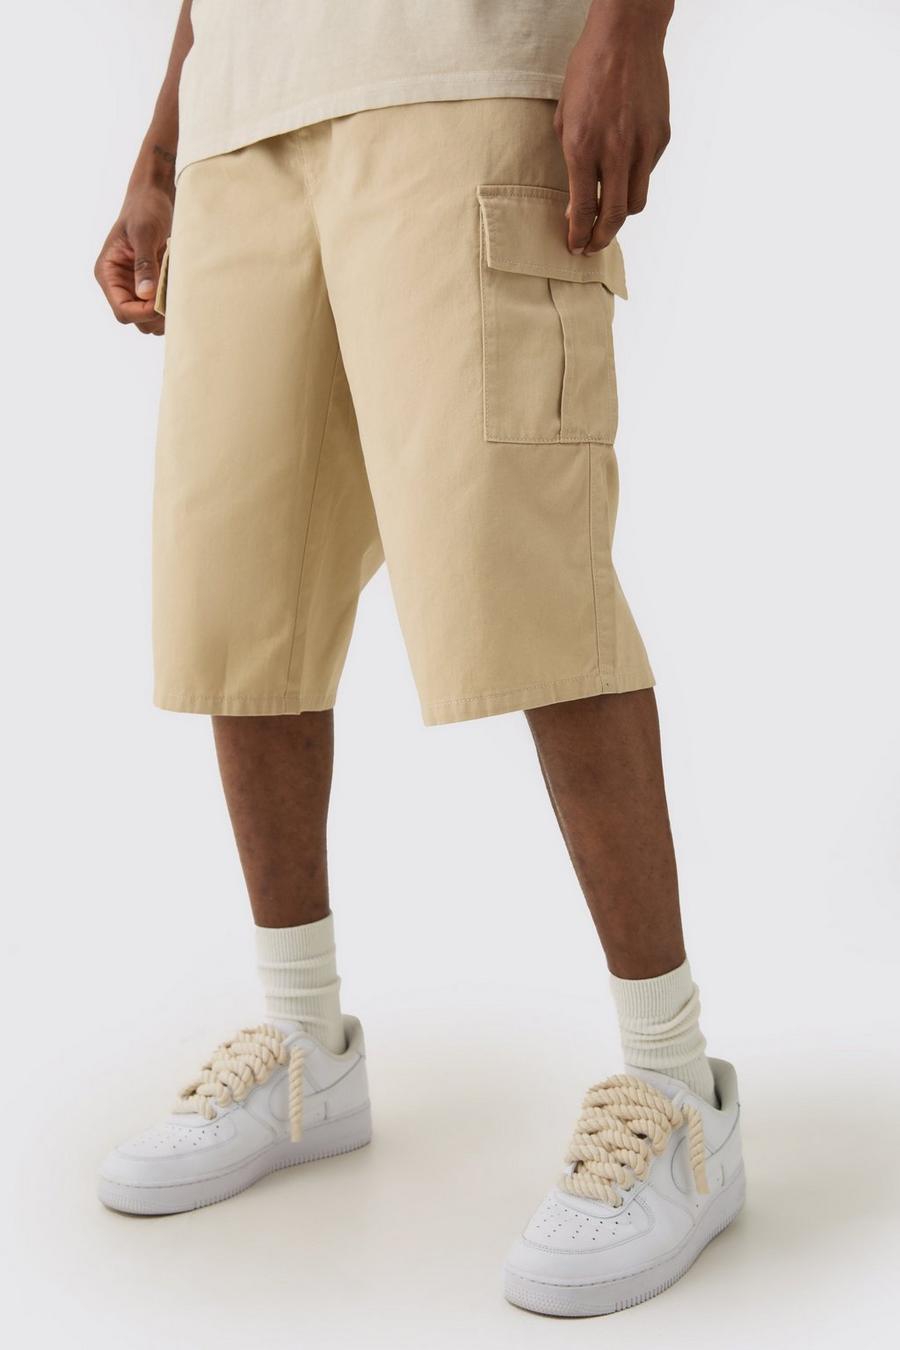 Stone Tall Elasticated Waist Relaxed Fit Cargo Jorts